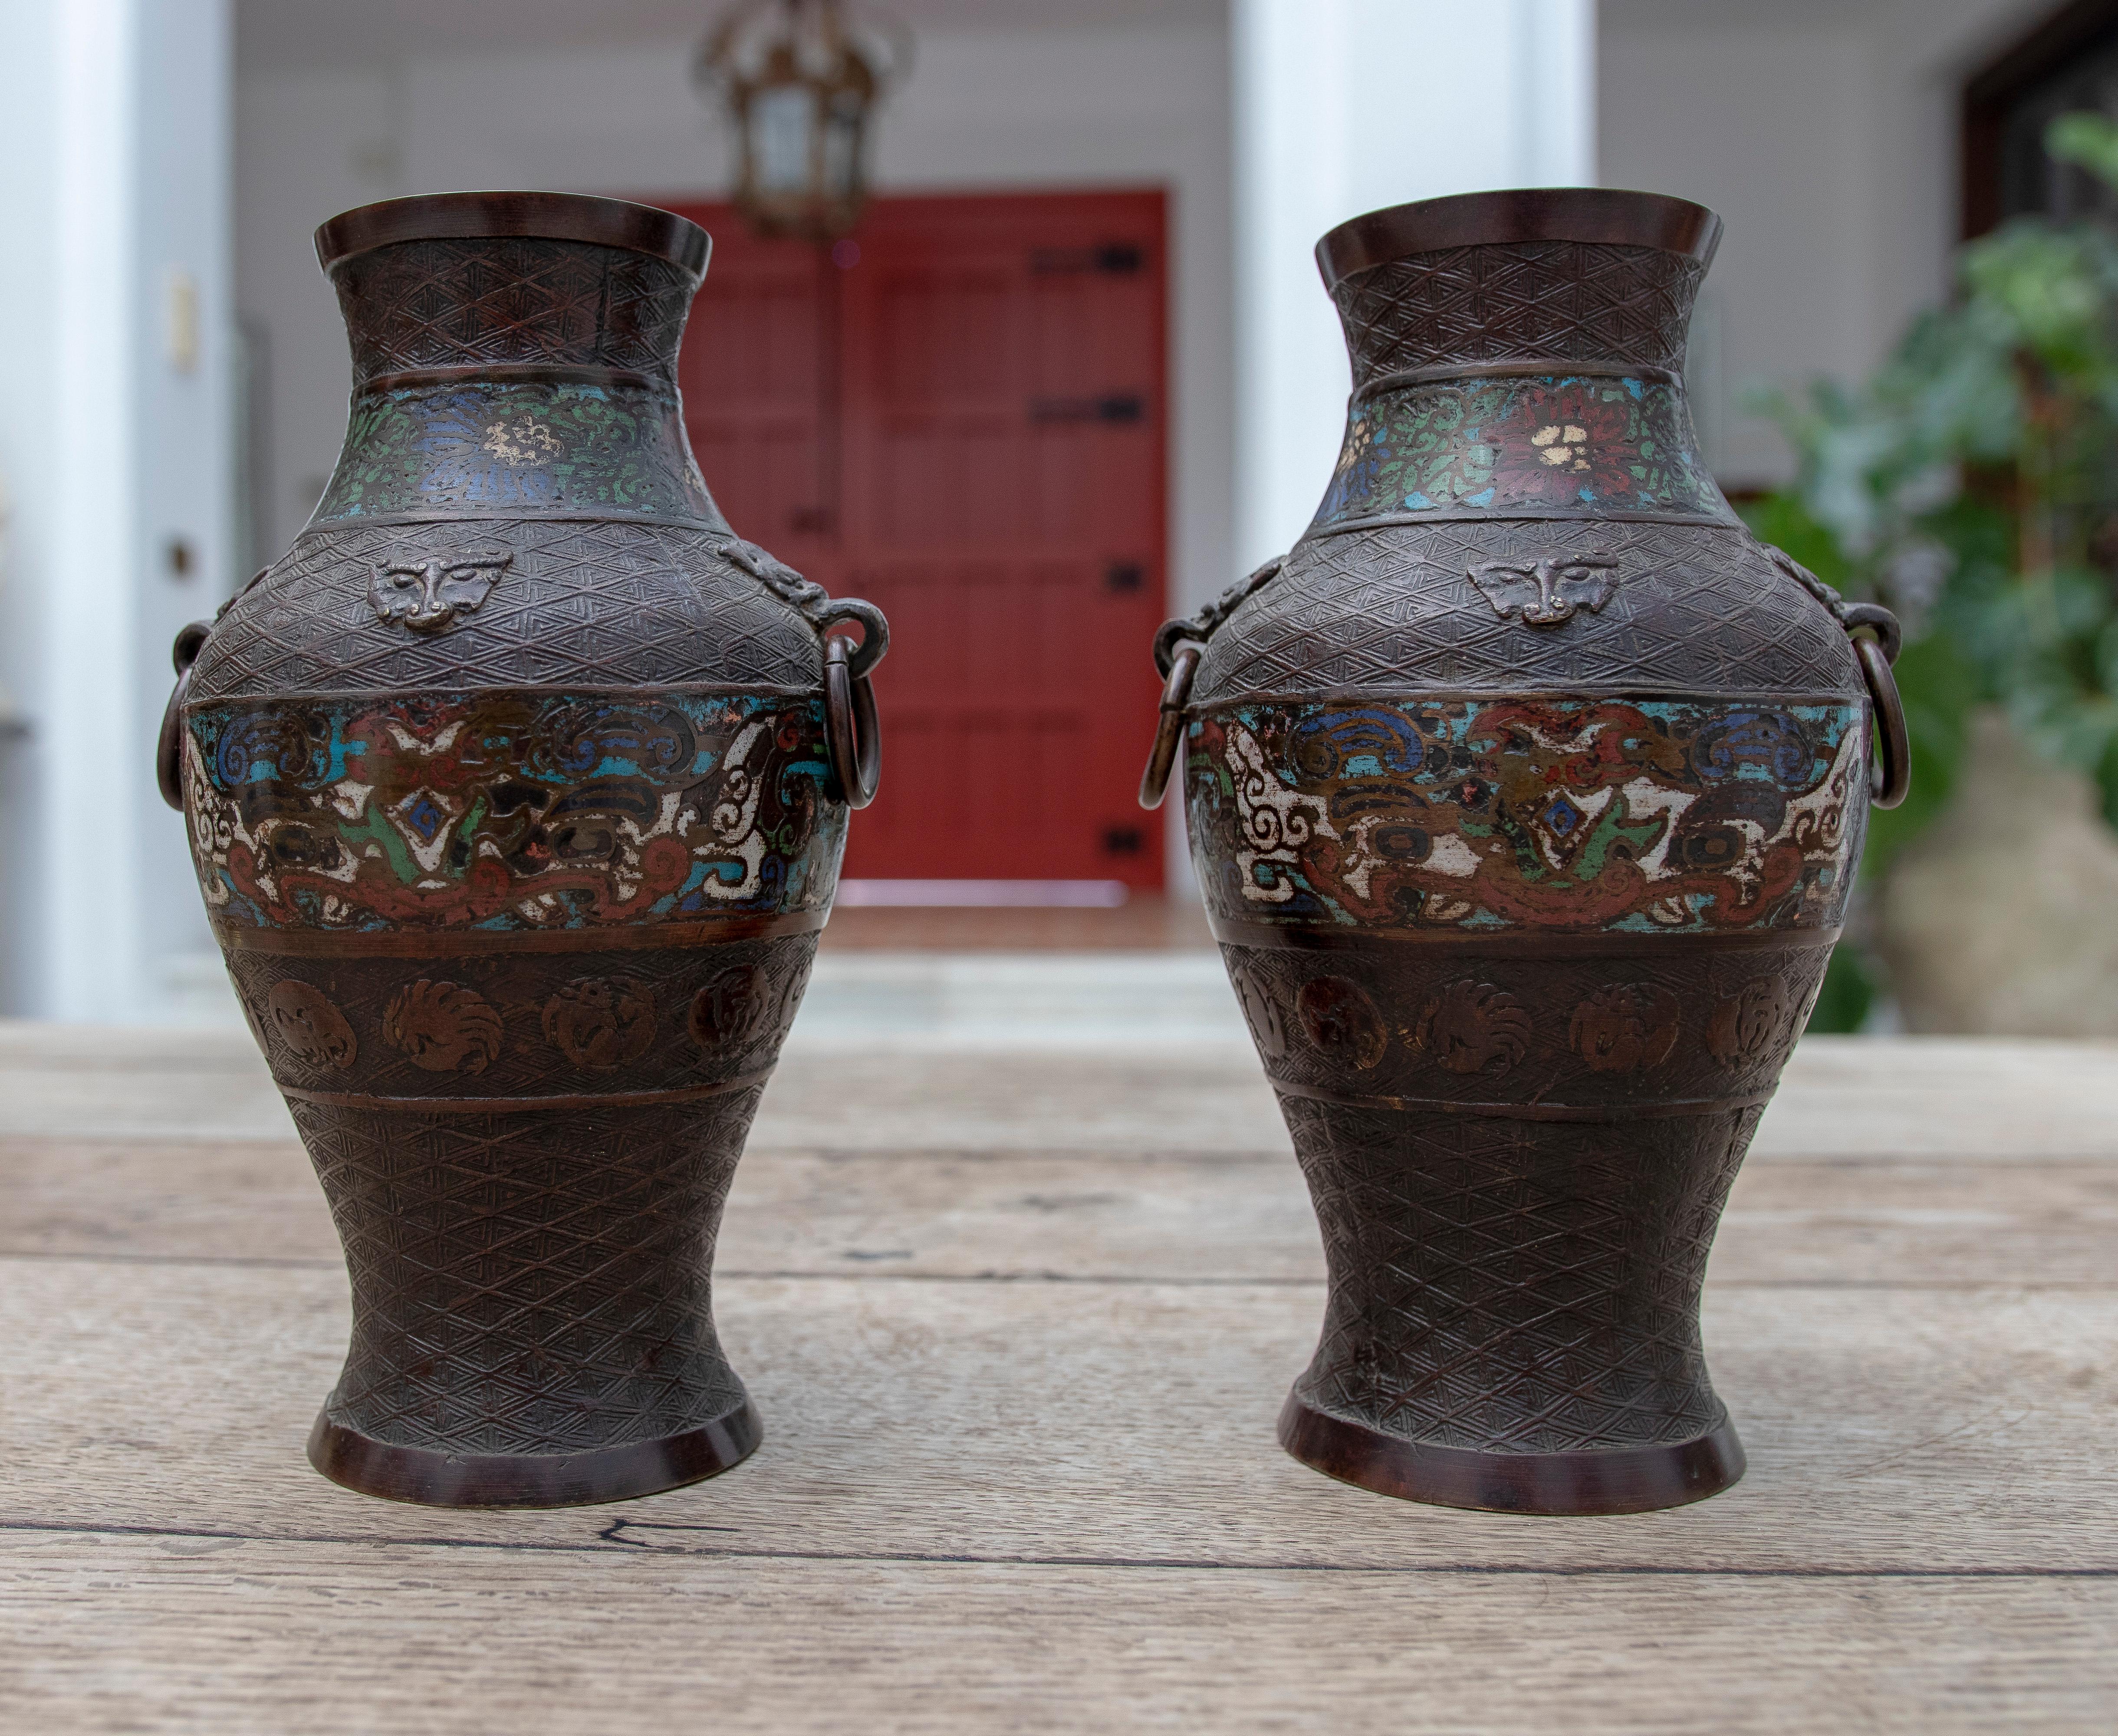 19th Century Chinese Pair of Bronze Vases with Cloissoné Technique For Sale 10